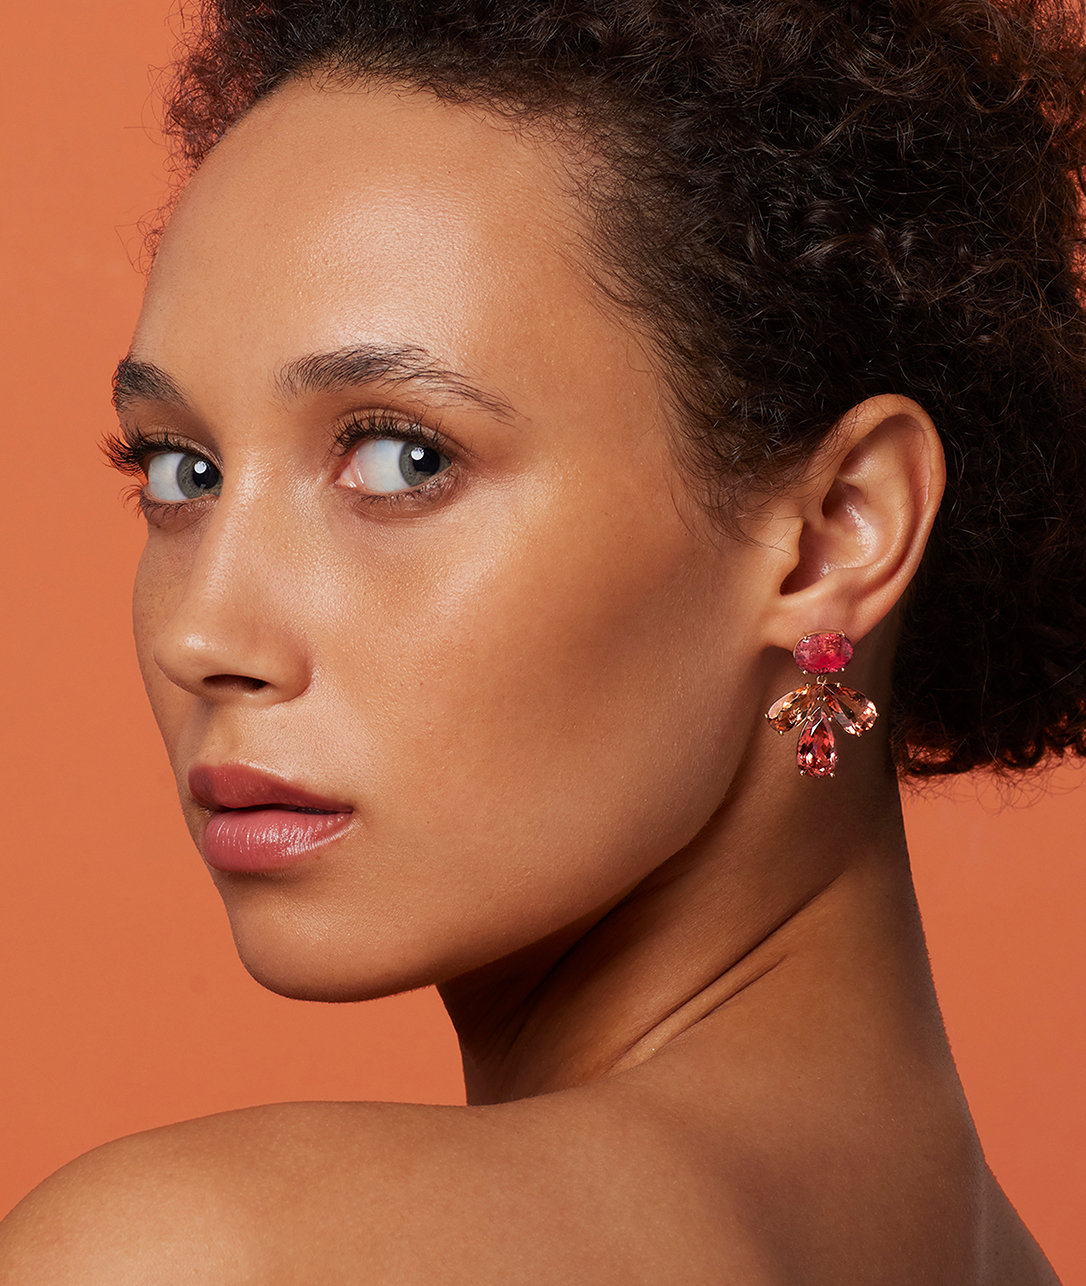                 For a gift full of glam, a pair of Gemmy Gem Earrings delivers.SHOP GEMMY GEM EARRINGS            